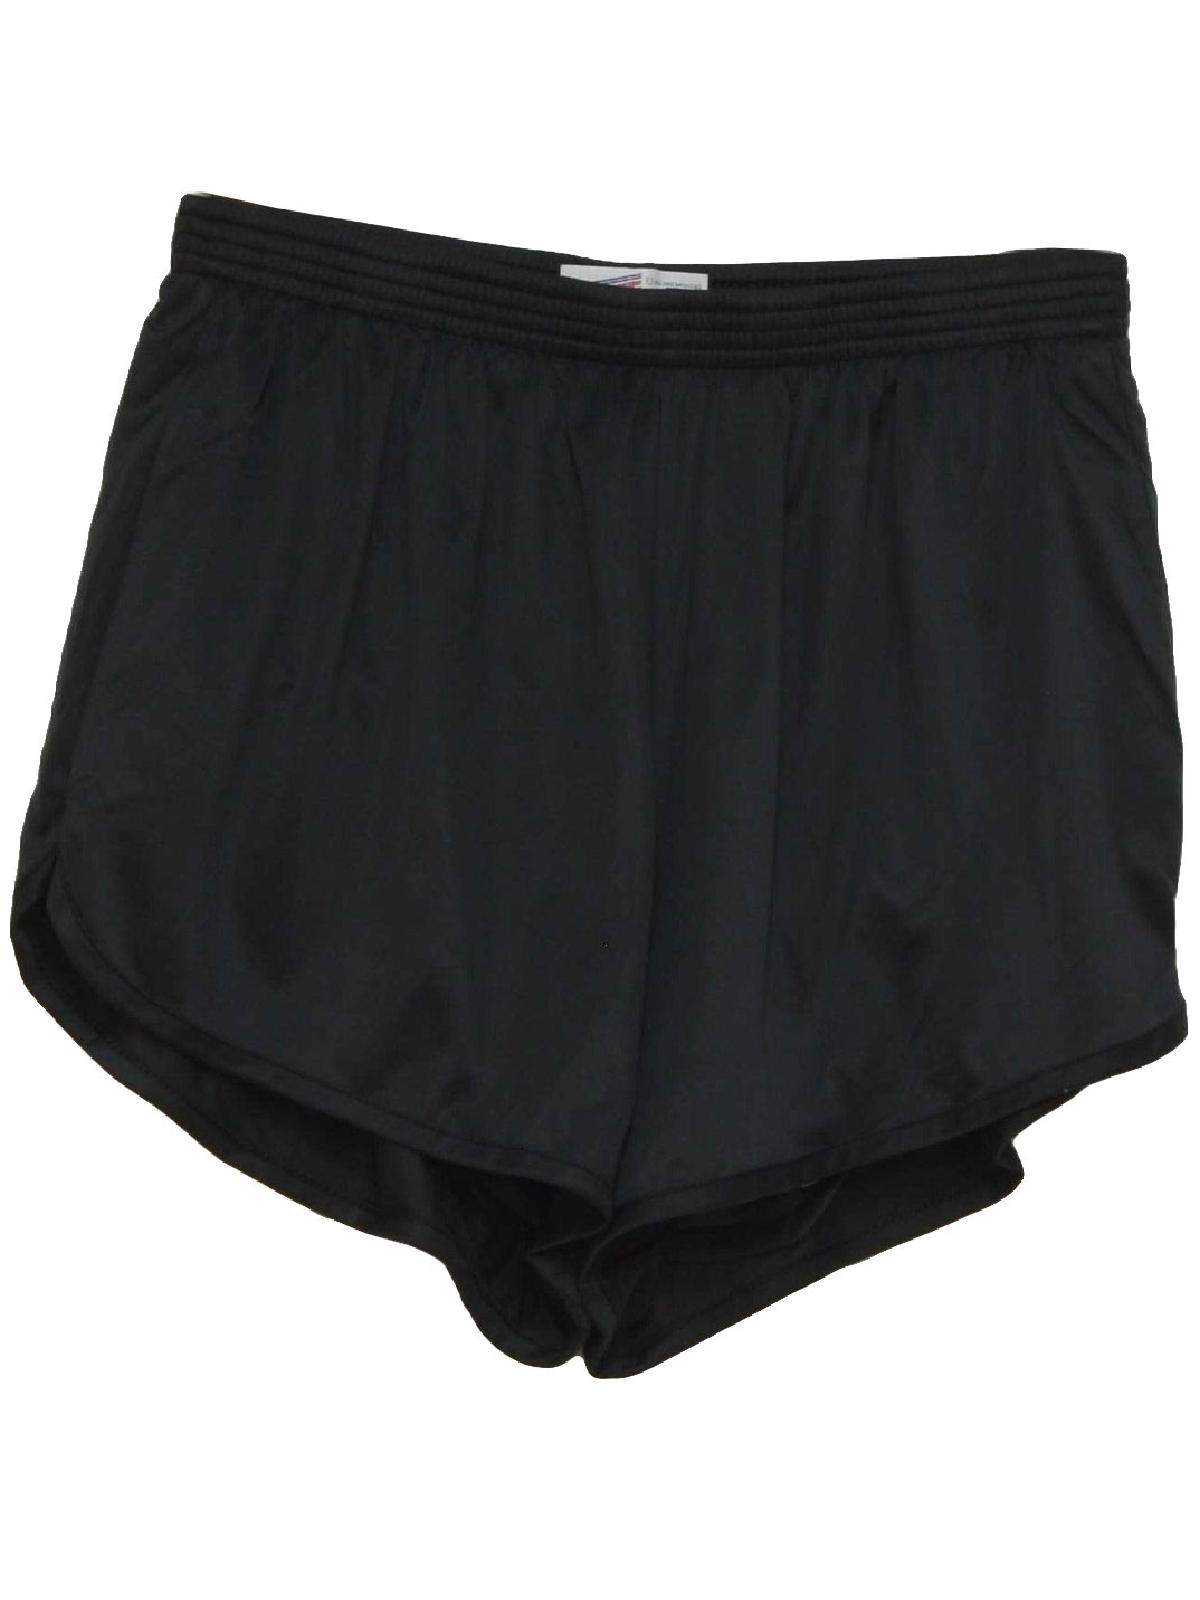 Vintage Soffe Eighties Shorts: 80s -Soffe- Mens black nylon brief lined ...